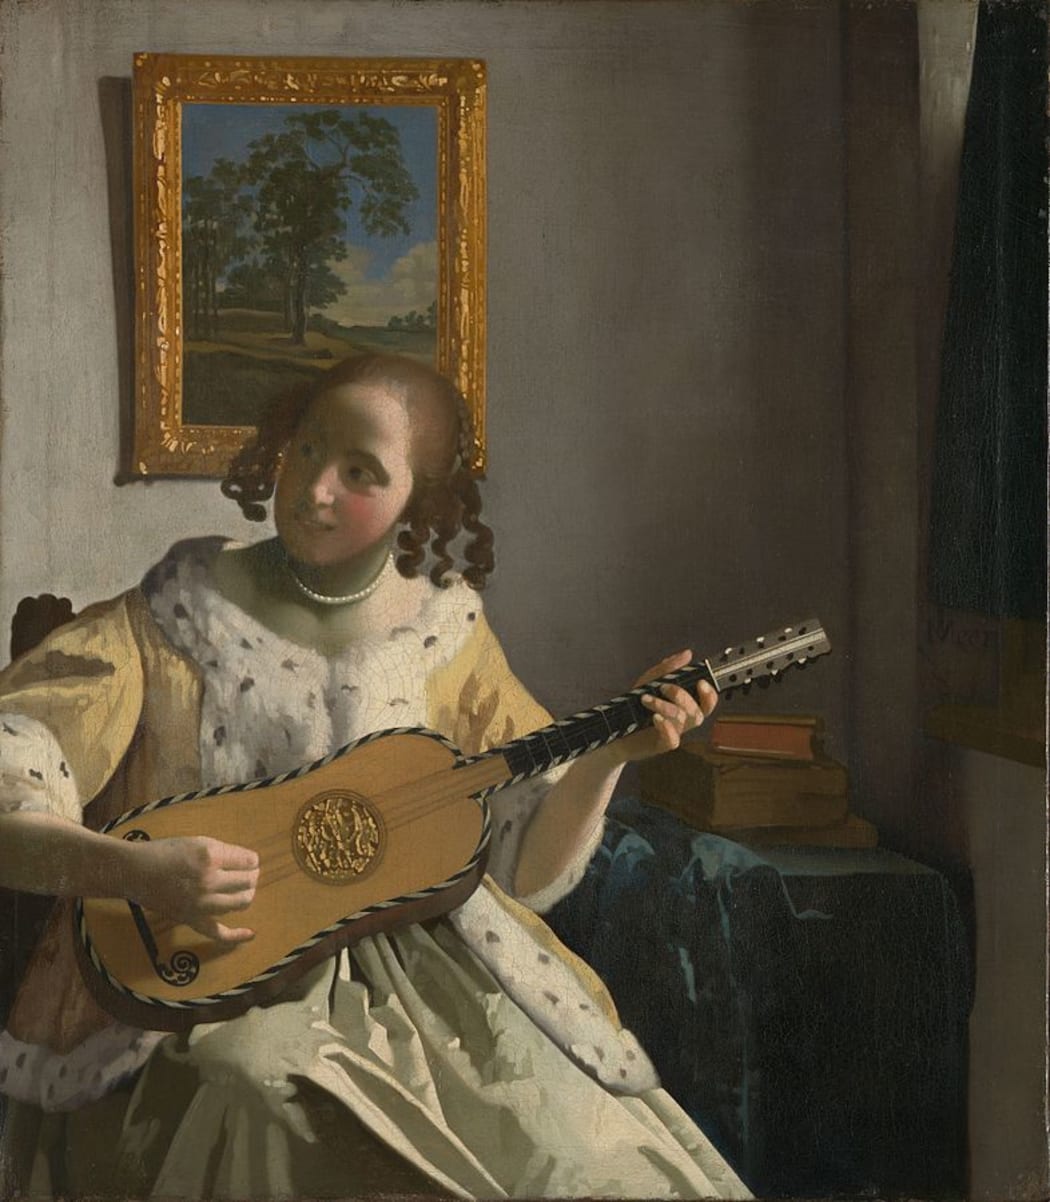 The painting The Guitar Player, by Vermeer